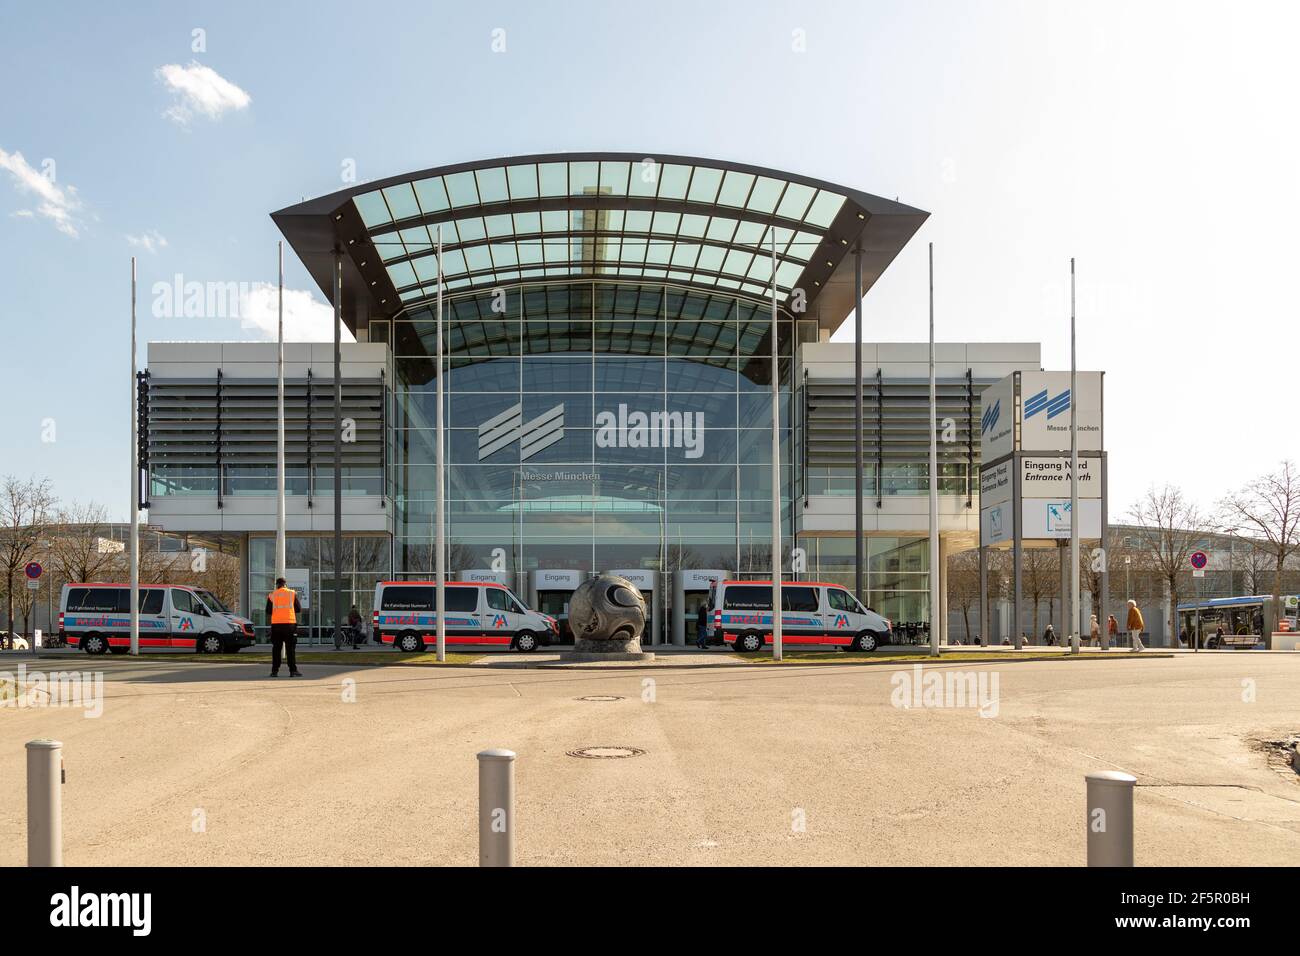 Das Impfzentrum München am 27.3.2021 in der Messe München. - The Munich Vaccination center on March 27 2021 in the Munich Trade fair hall. (Photo by Alexander Pohl/Sipa USA) Credit: Sipa USA/Alamy Live News Stock Photo